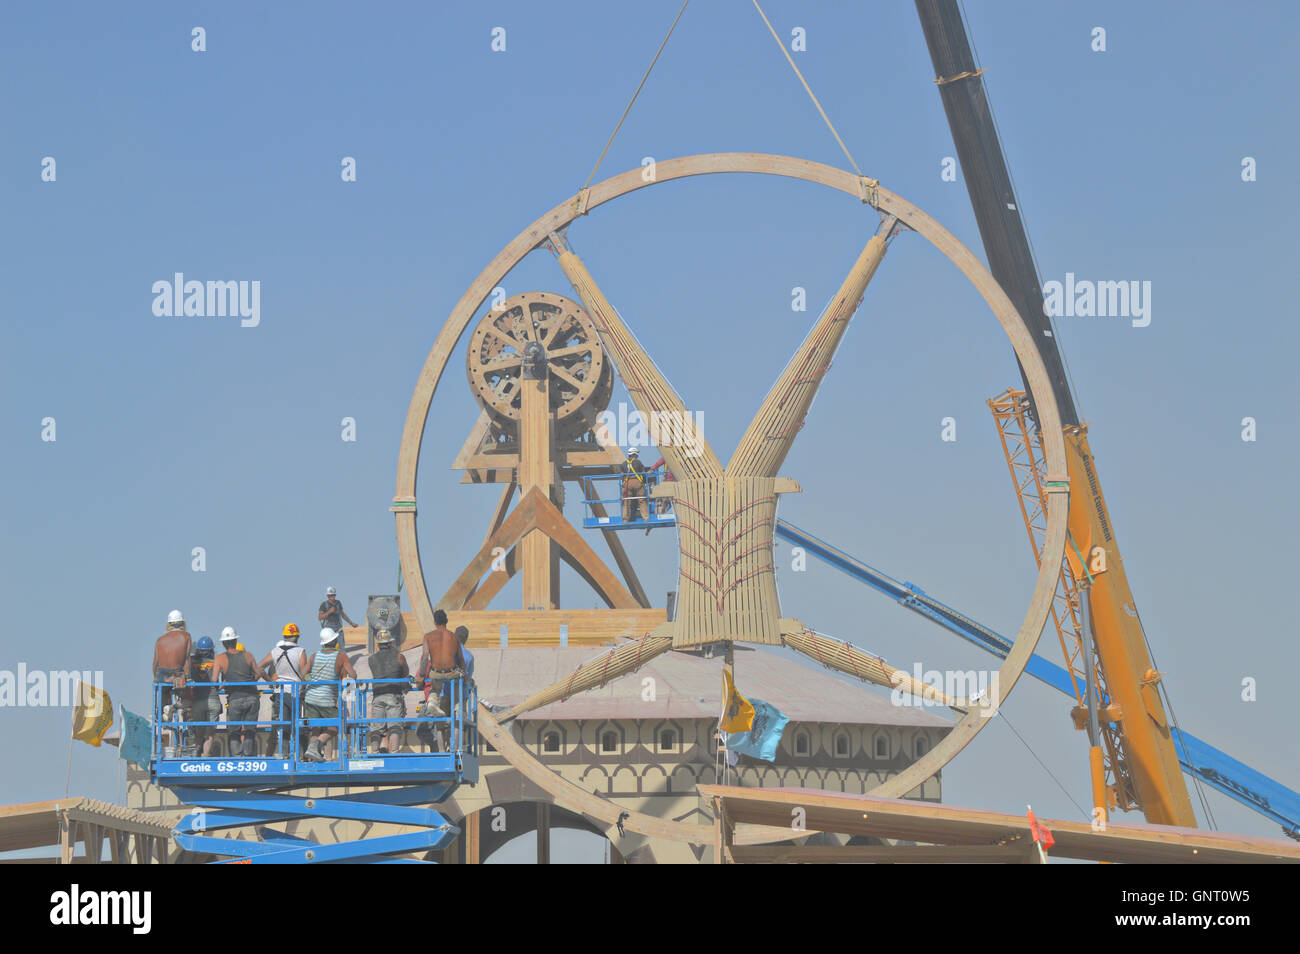 Construction cranes lift the giant effigy during set up for the annual desert festival Burning Man August 28, 2016 in Black Rock City, Nevada. Stock Photo